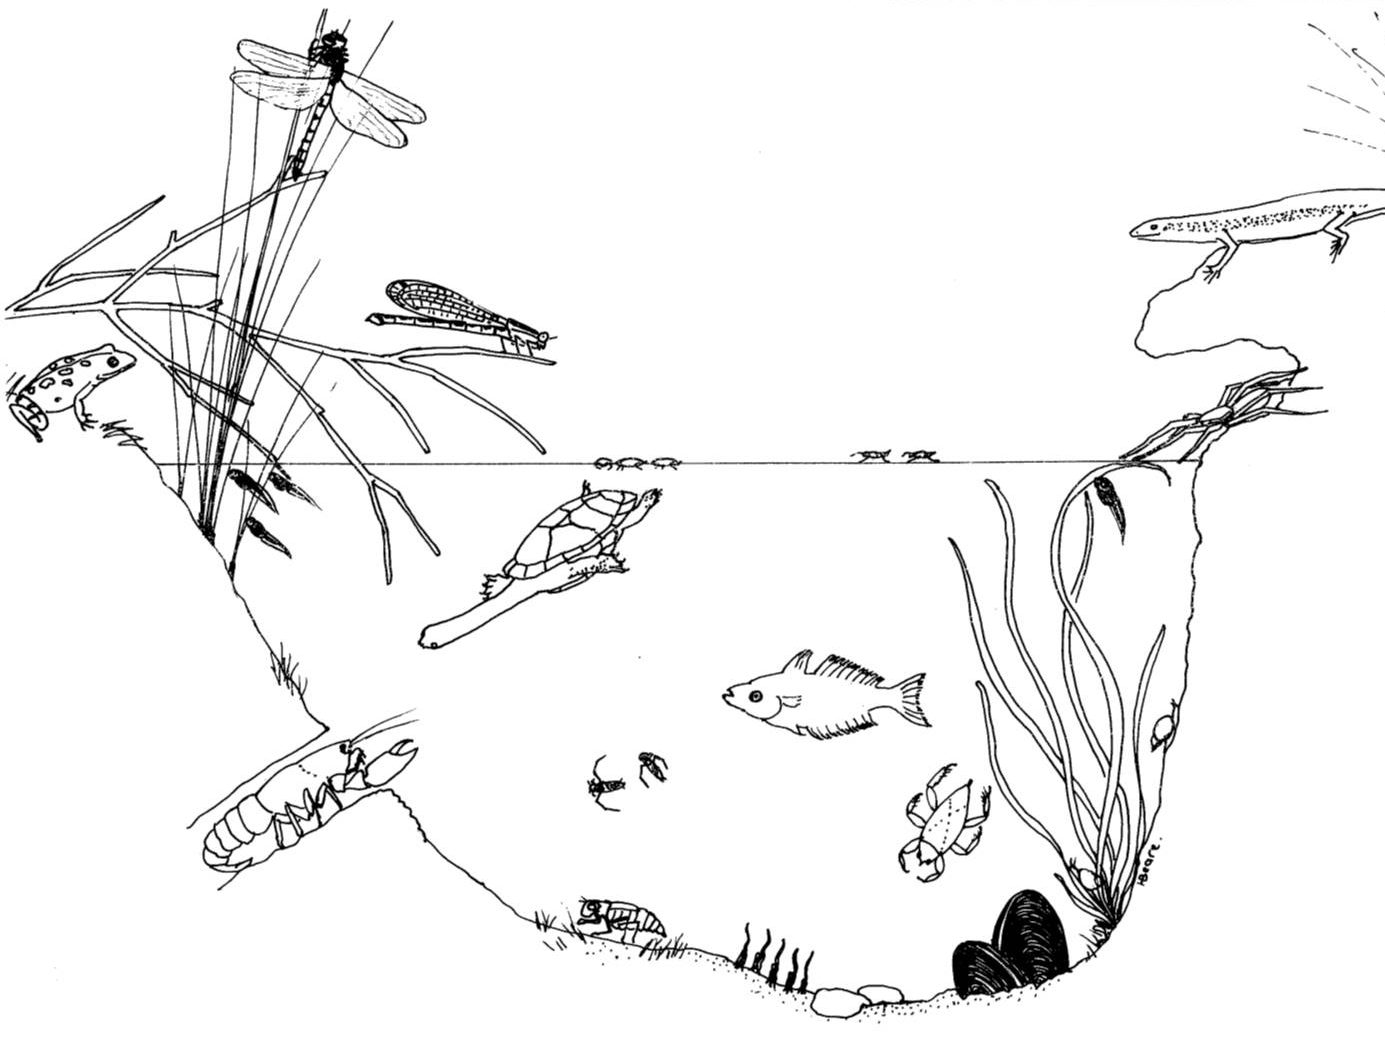 Freshwater life colouring in sheets